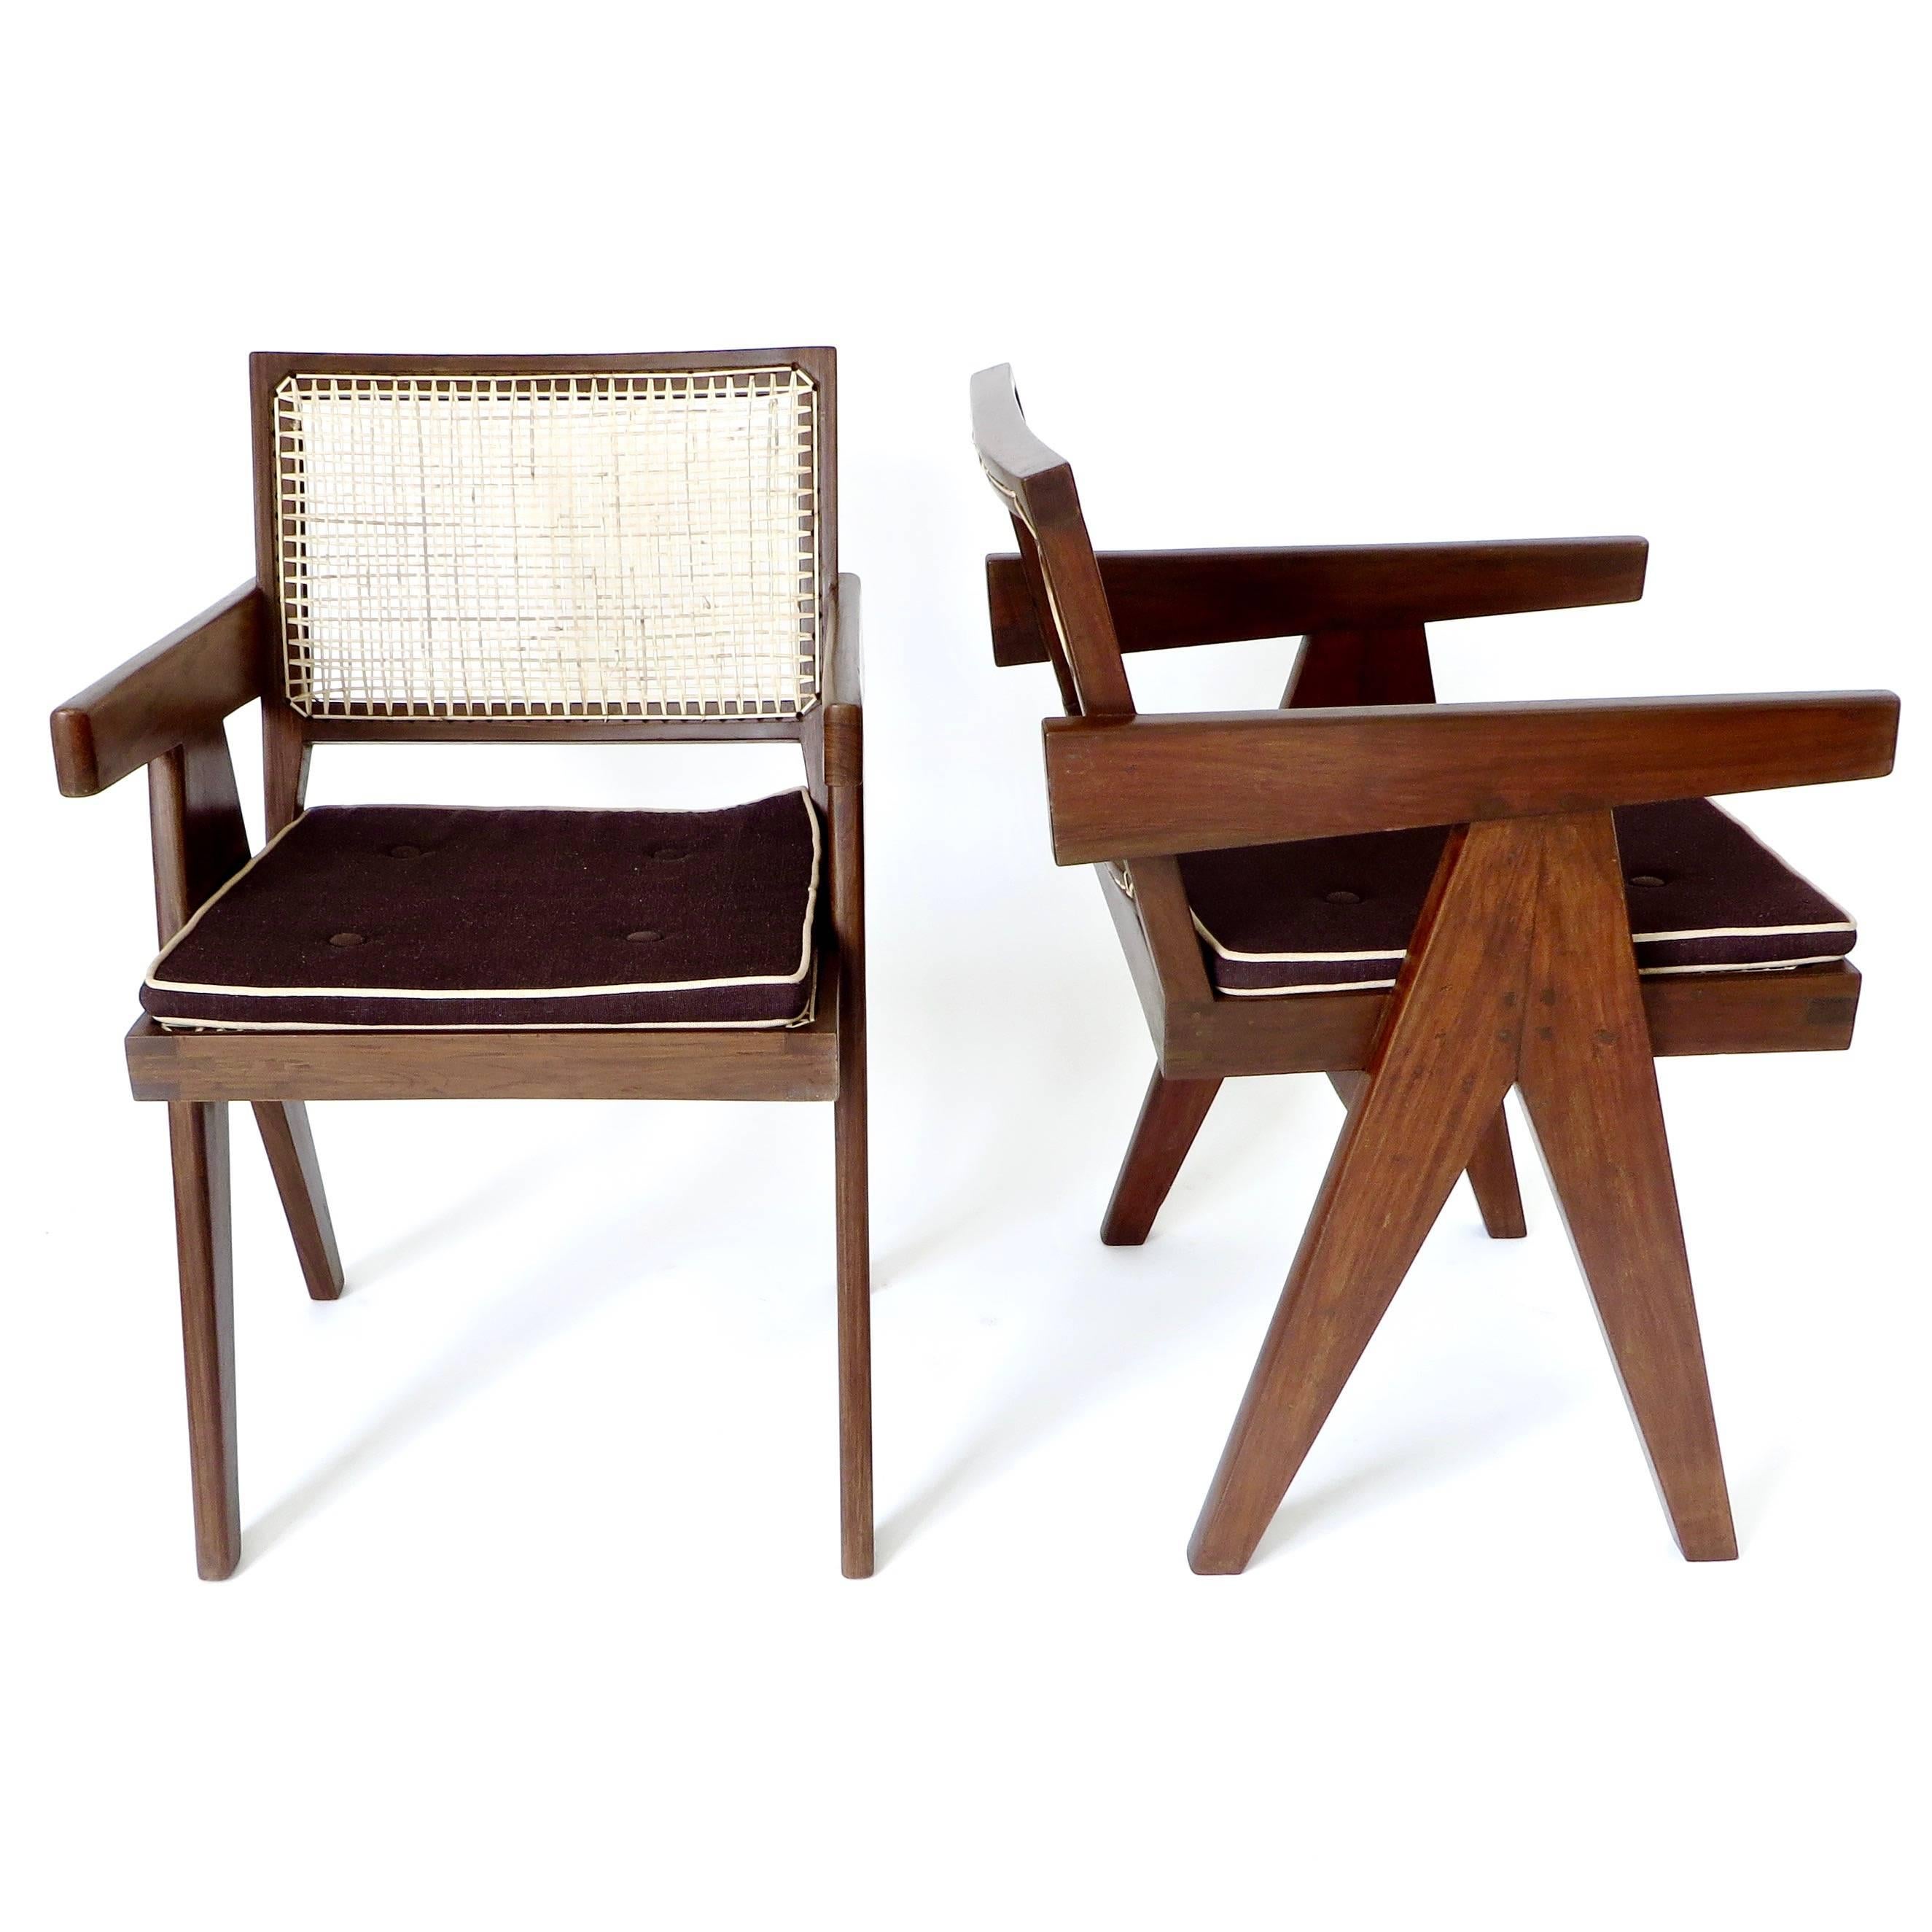 Pierre Jeanneret (1896-1967).
A pair of armchairs called 